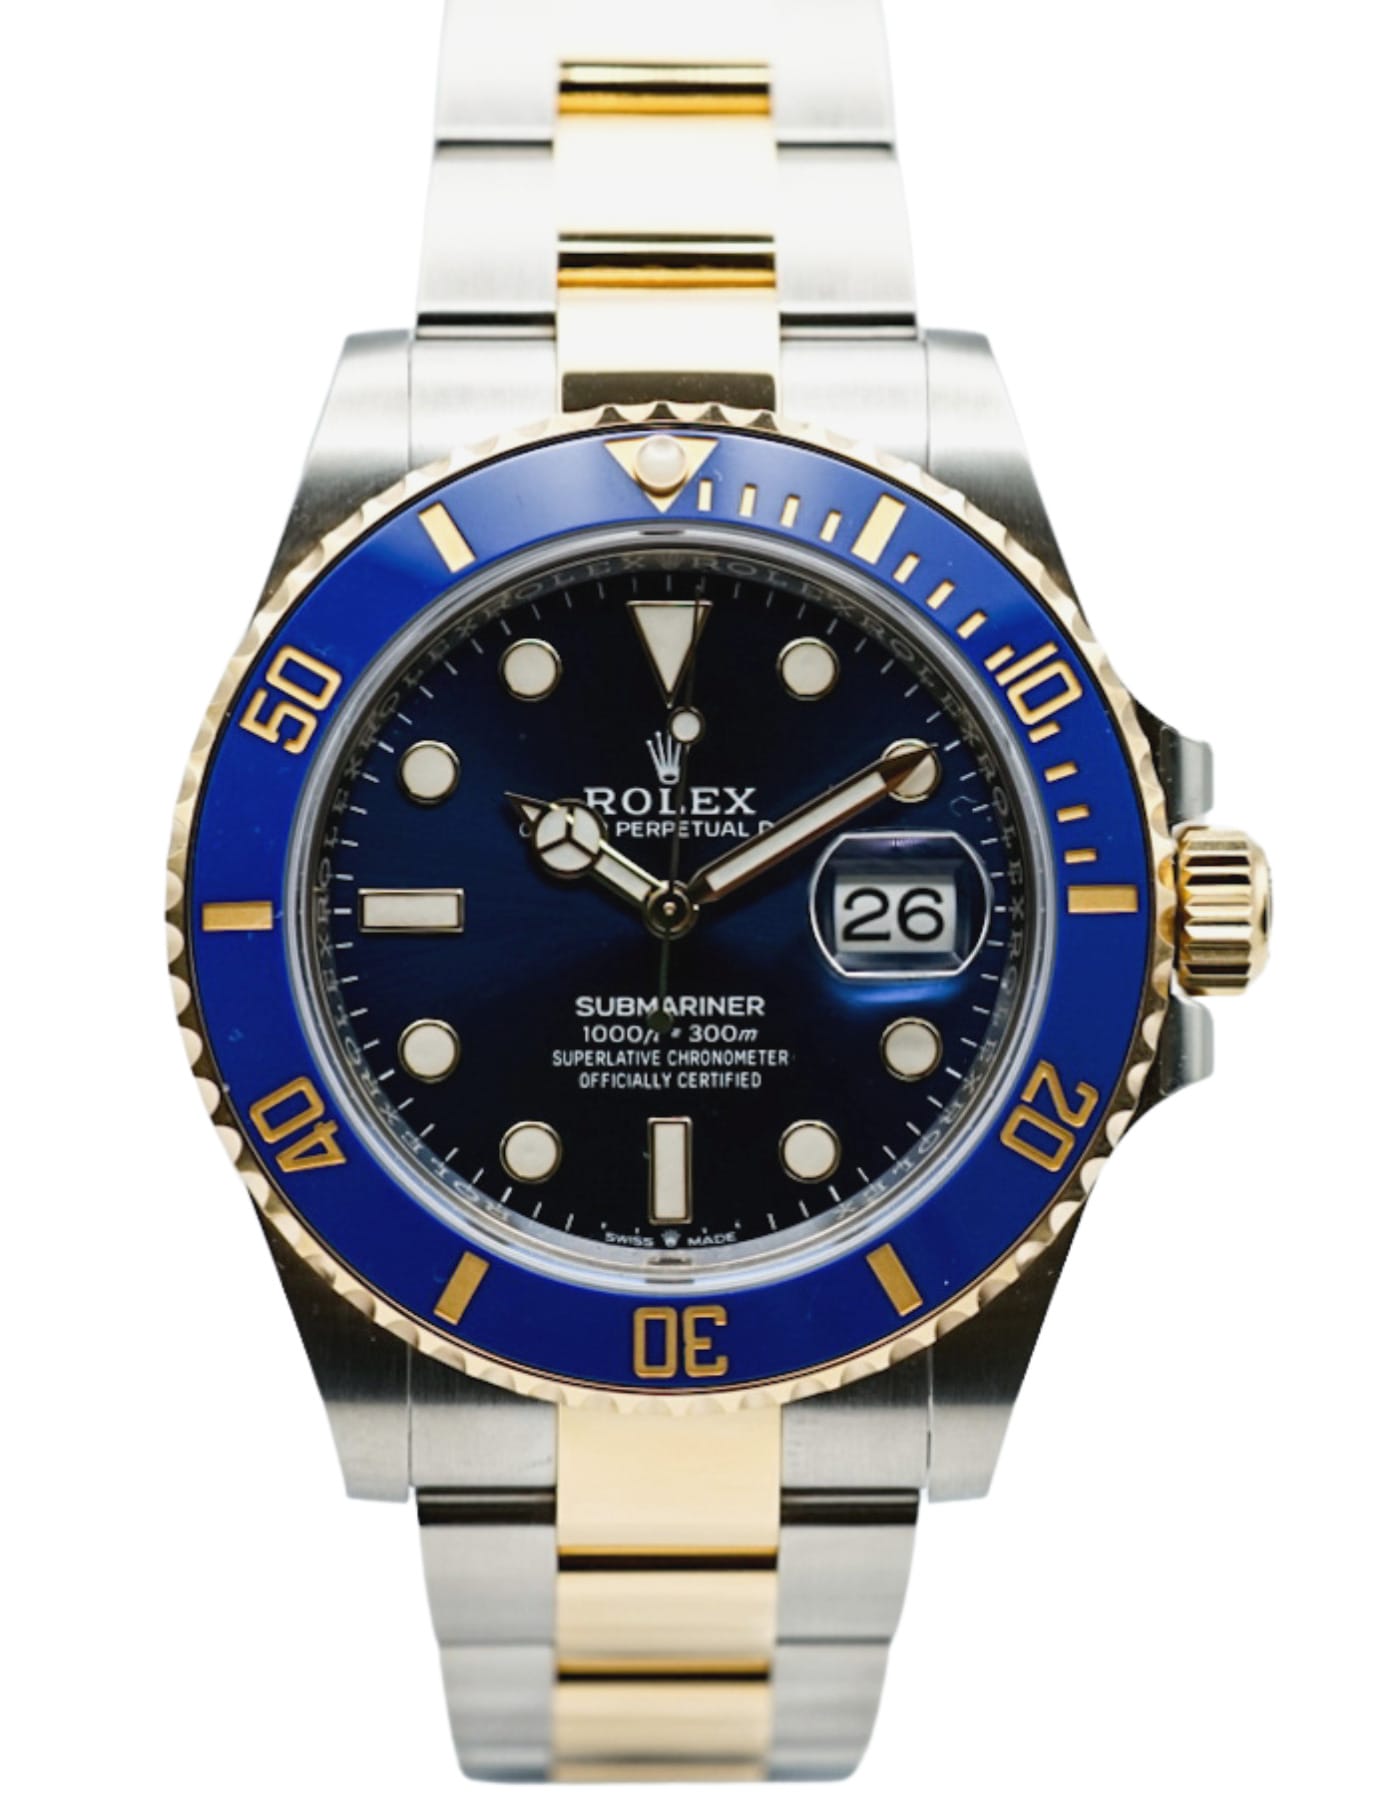 Rolex Submariner Date 126613LB 'Bluesy' Blue Ceramic Bezel Two Tone Yellow Stainless Steel 41mm - Luxury Watches | Buy Genuine Brands Rolex Omega IWC Zaeger